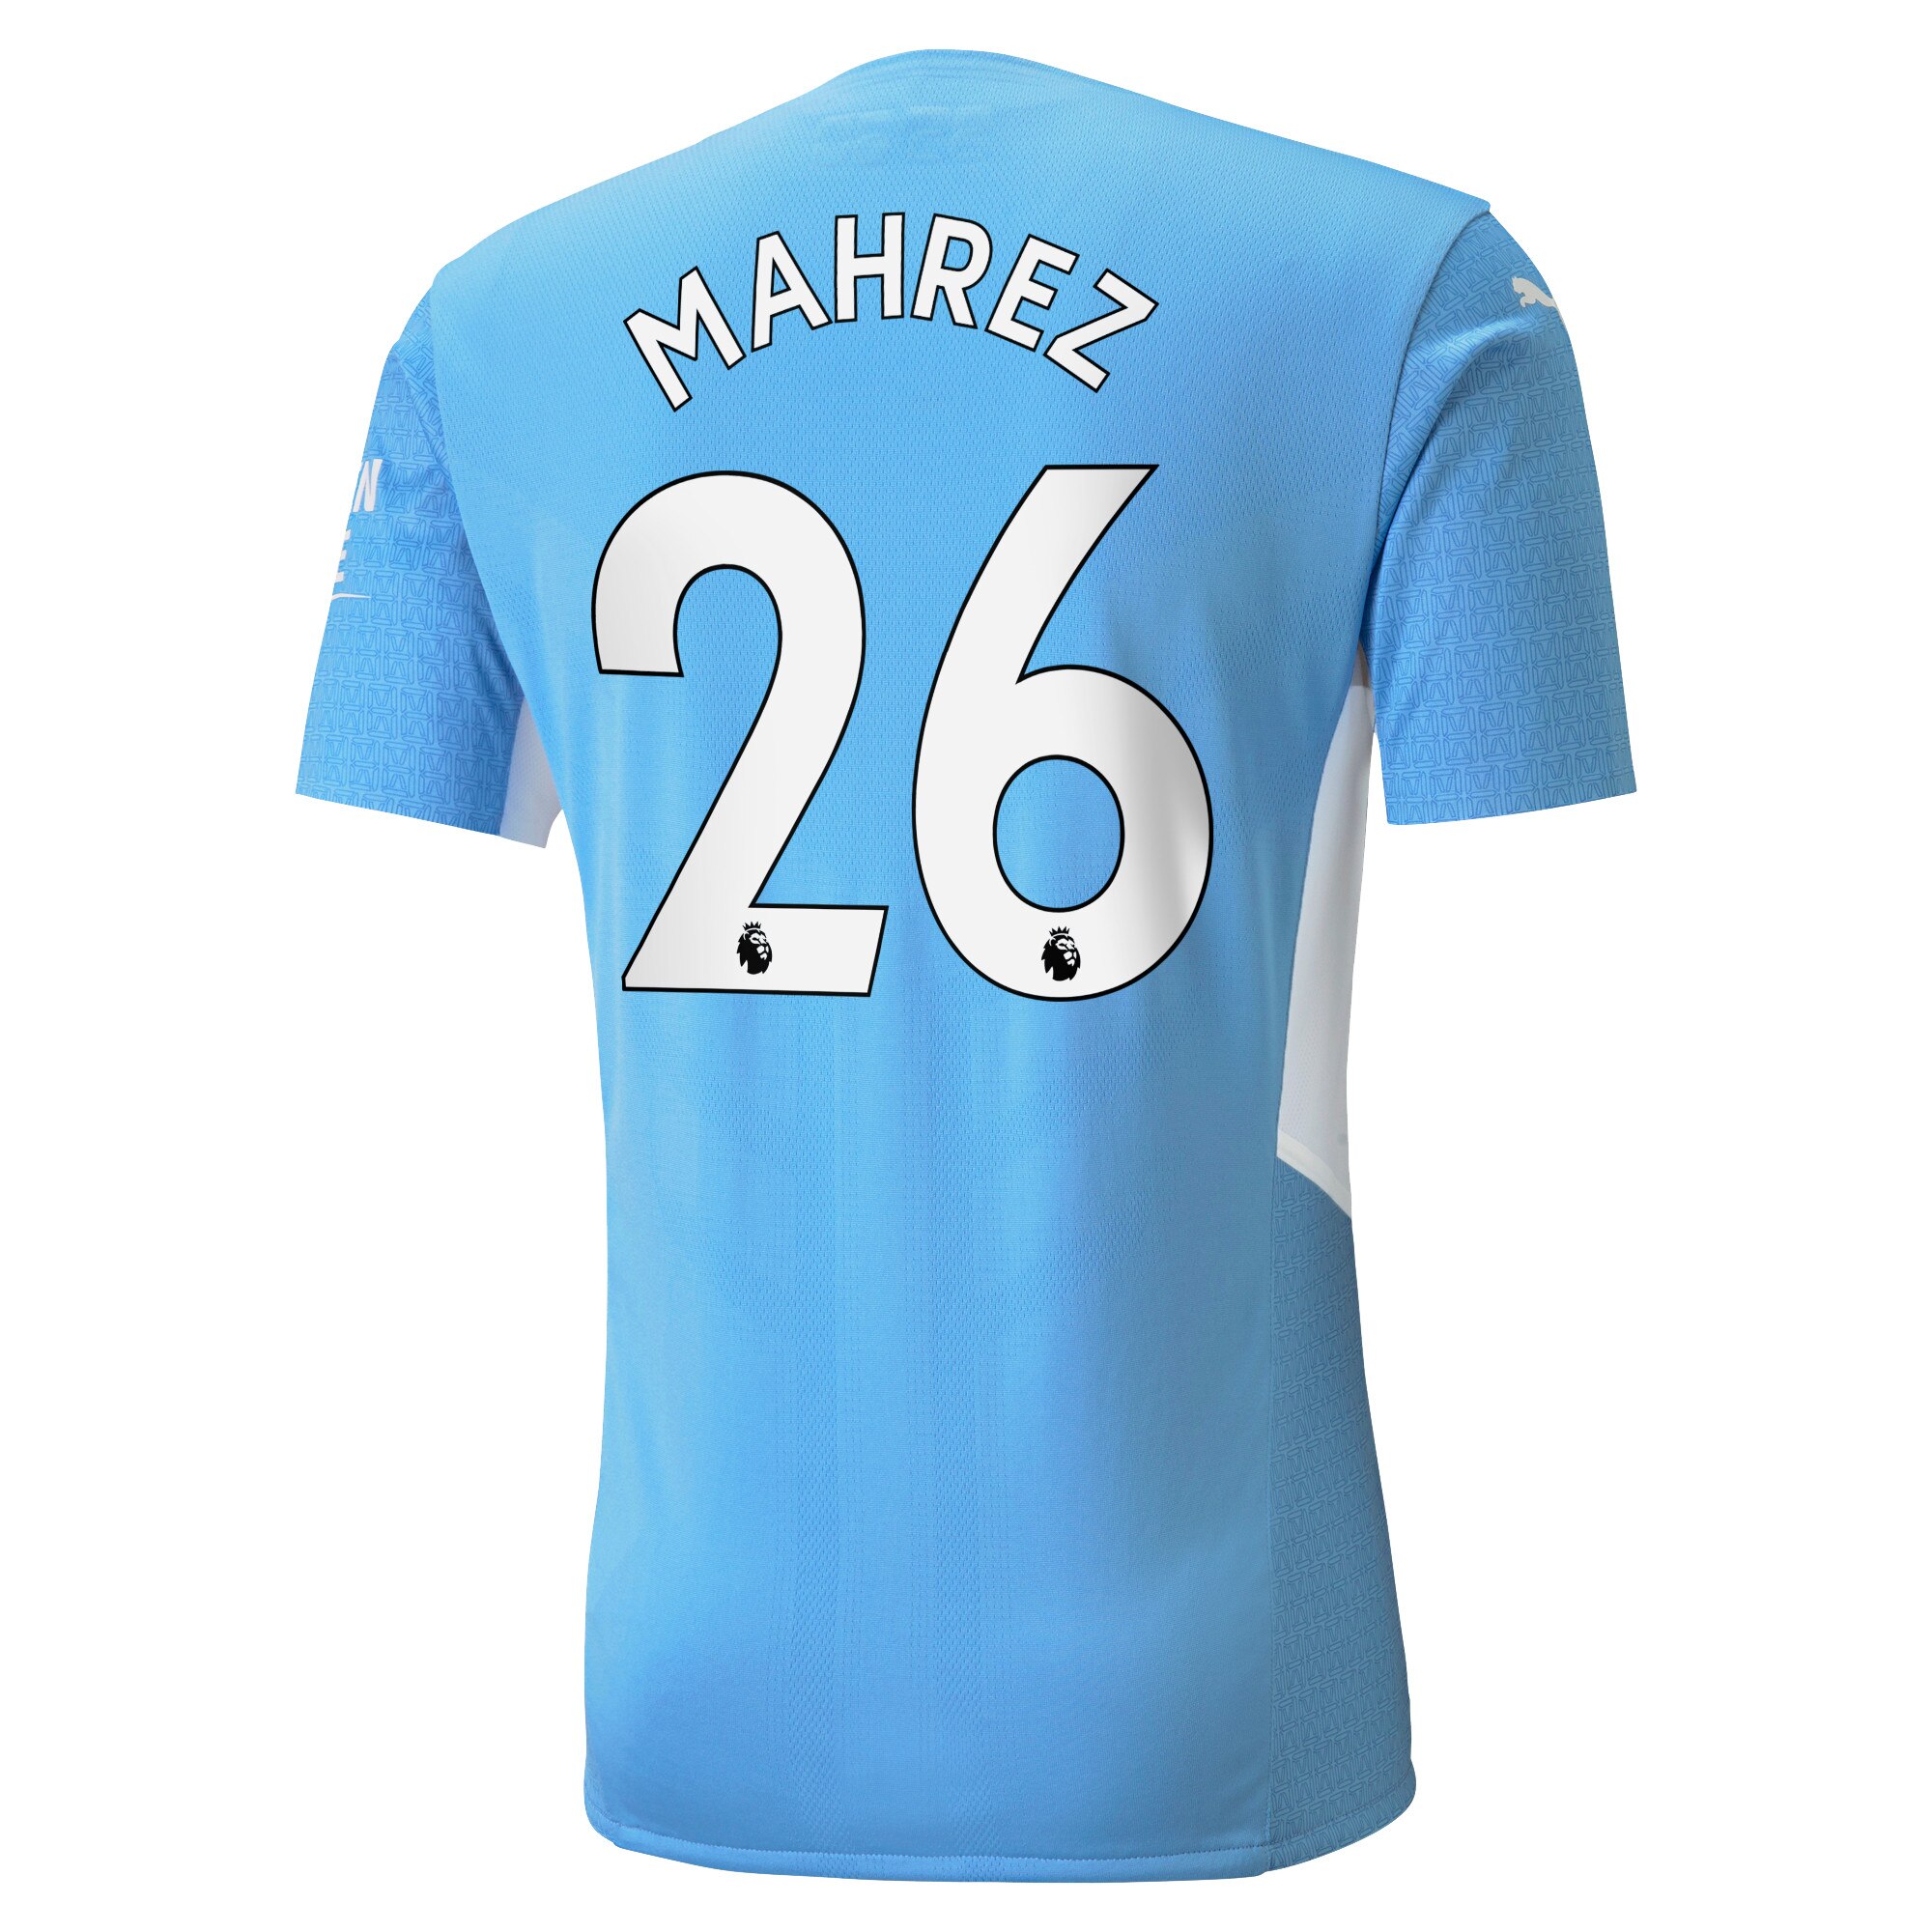 Manchester City Authentic Home Shirt 2021-22 with Mahrez 26 printing